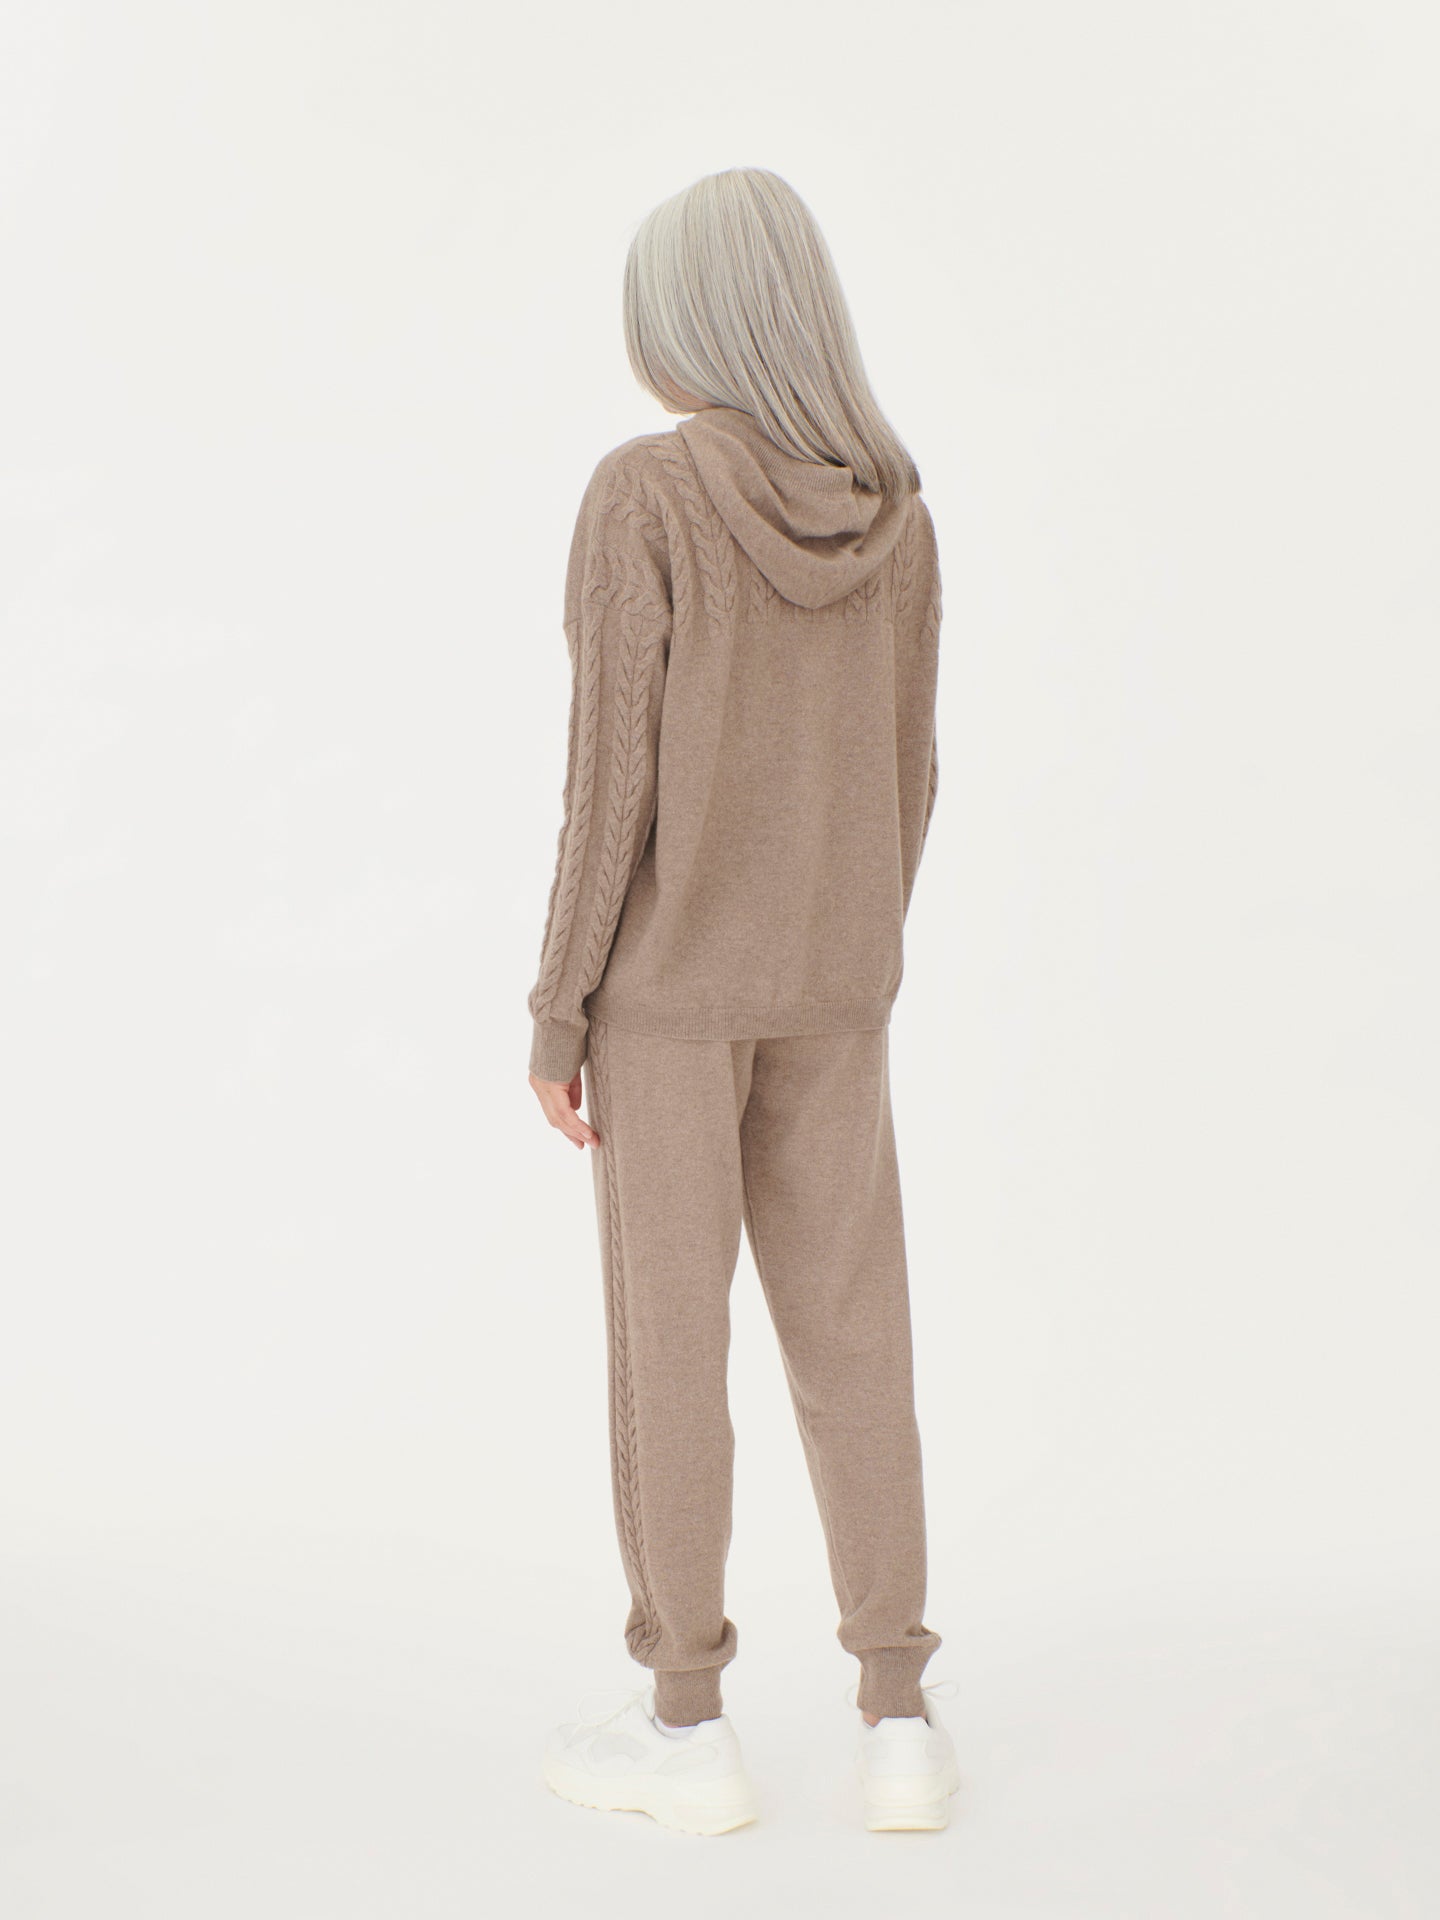 Women's Cashmere Hoodie With Cable Knitted Sleeves Taupe - Gobi Cashmere